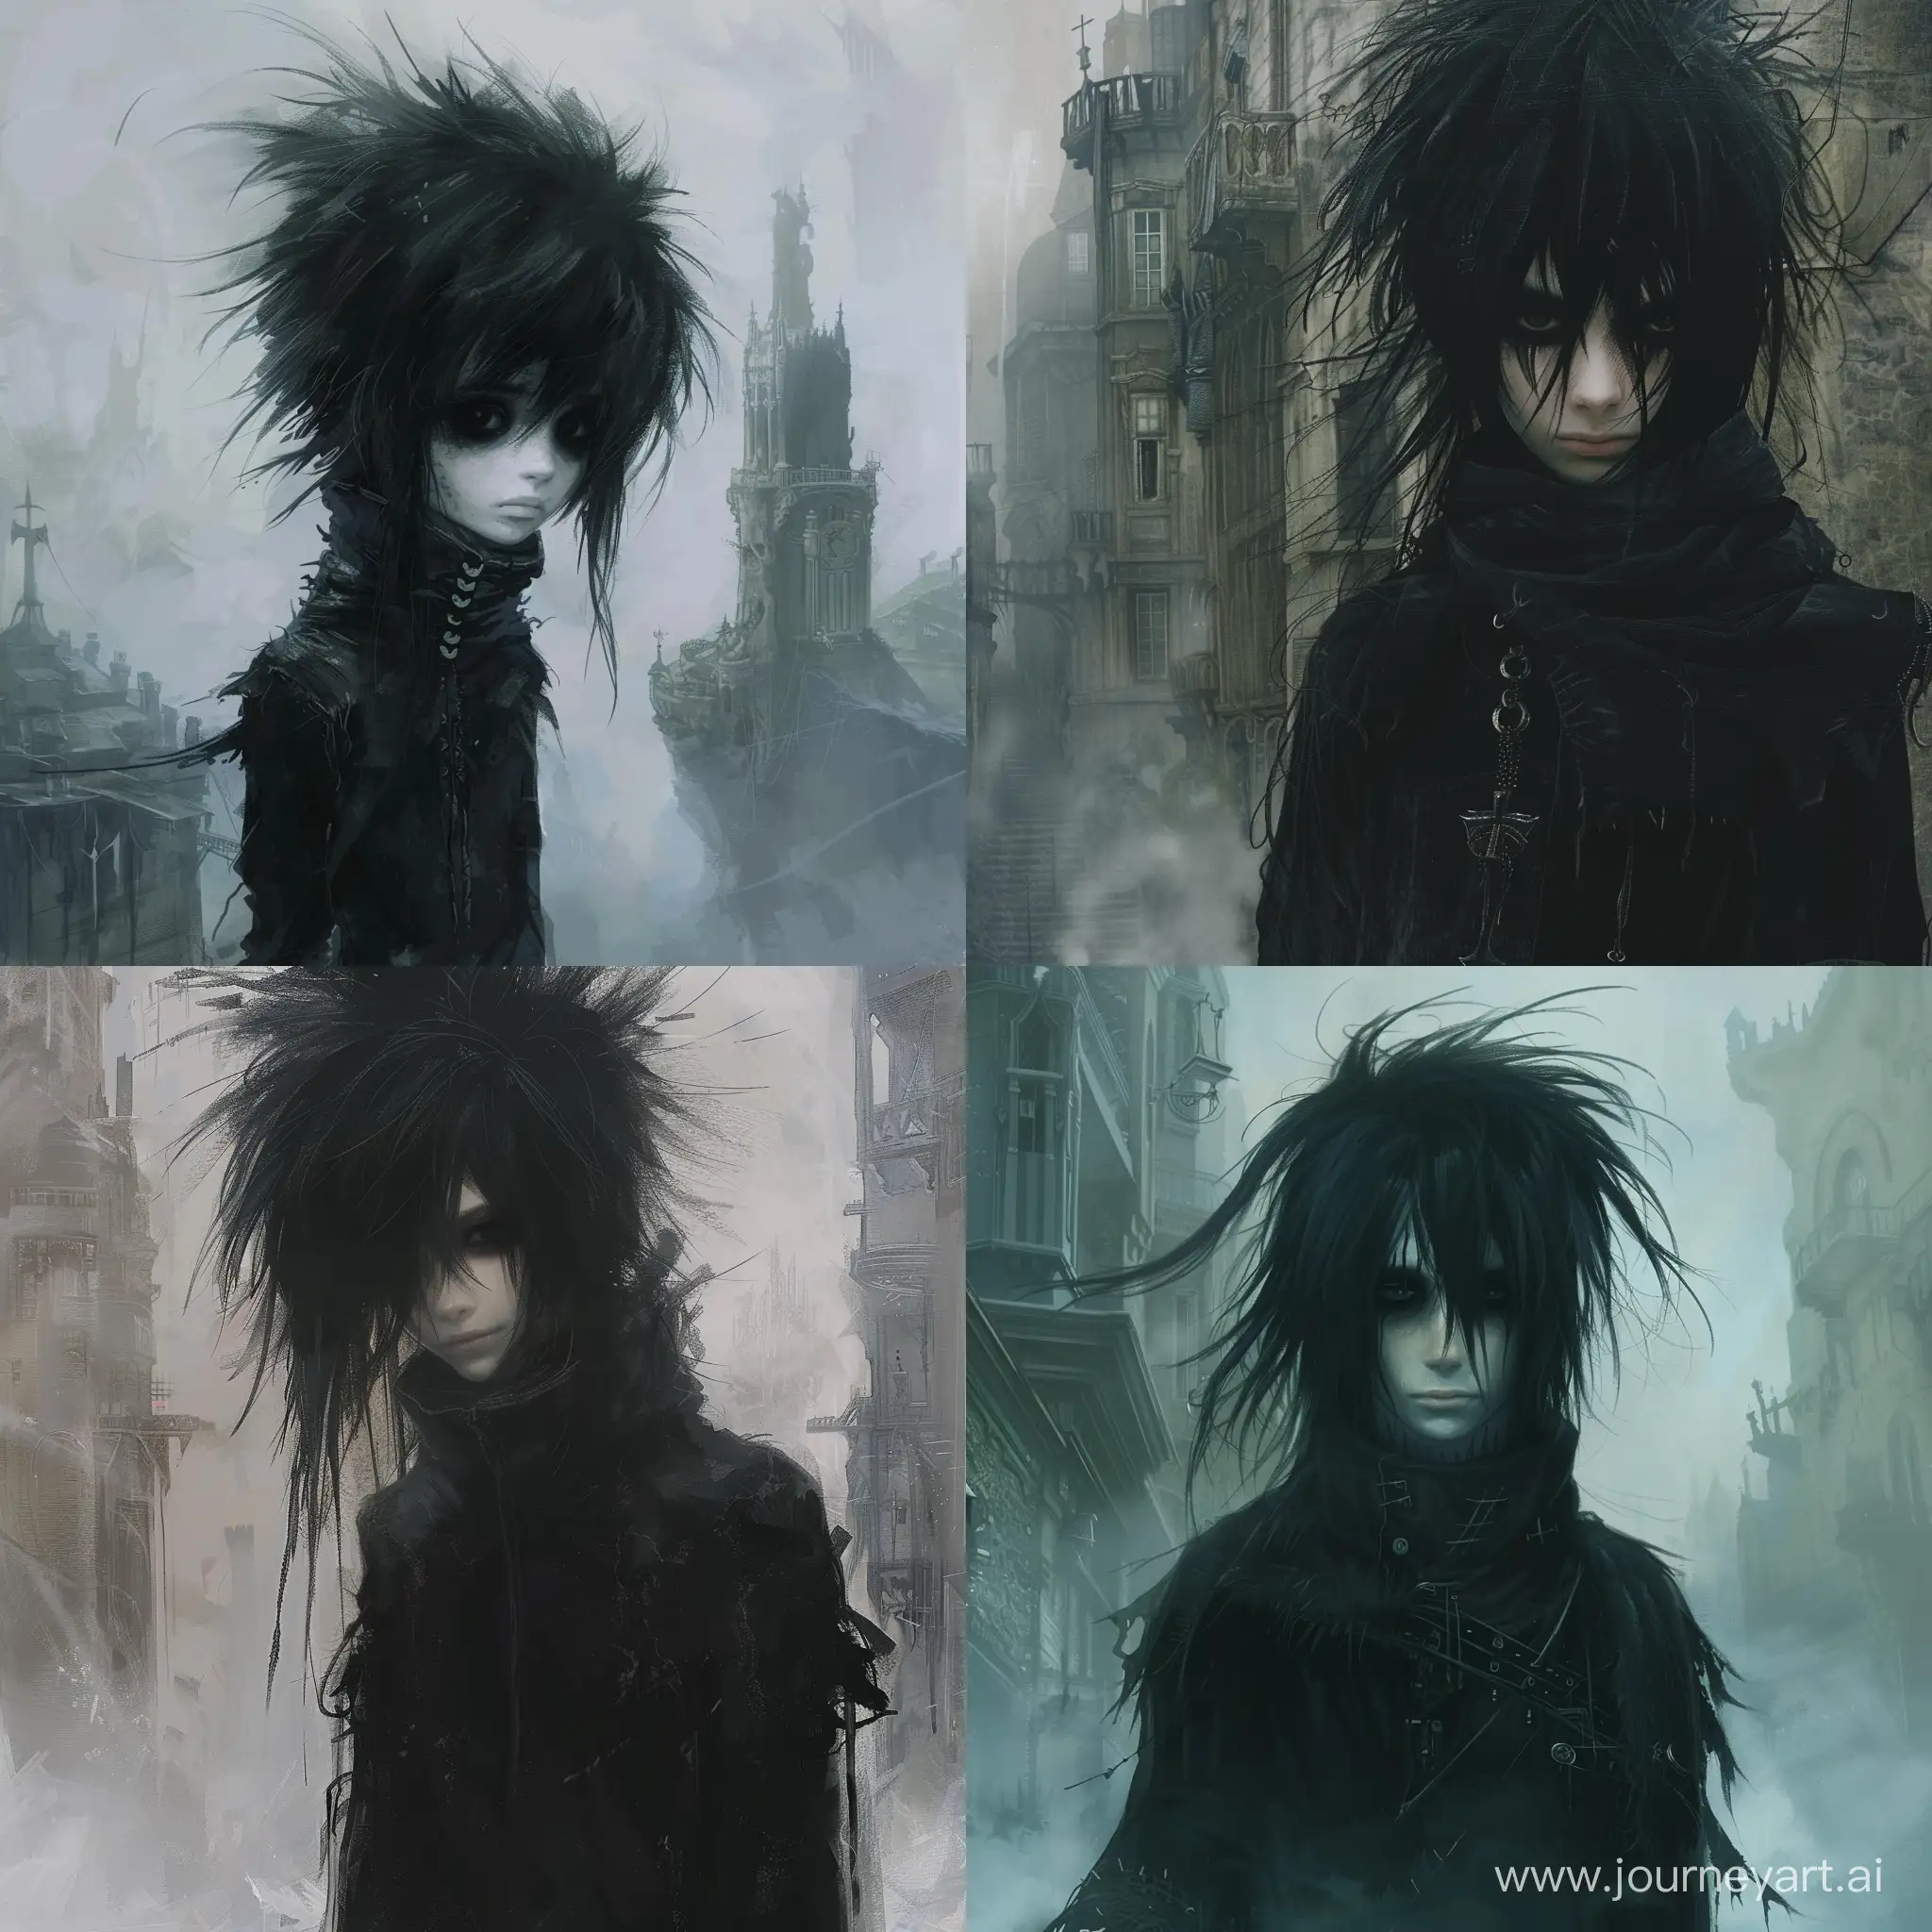 Yoshitaka Amano art style, a young guy of about 17-18 years old, visual kei;goth clothing, black clothes, long black shaggy hair, wonderland, fairytale country, creepy, gloomy, black eyes, human, blank, fog, a little smile rough facial features, building, tall height 